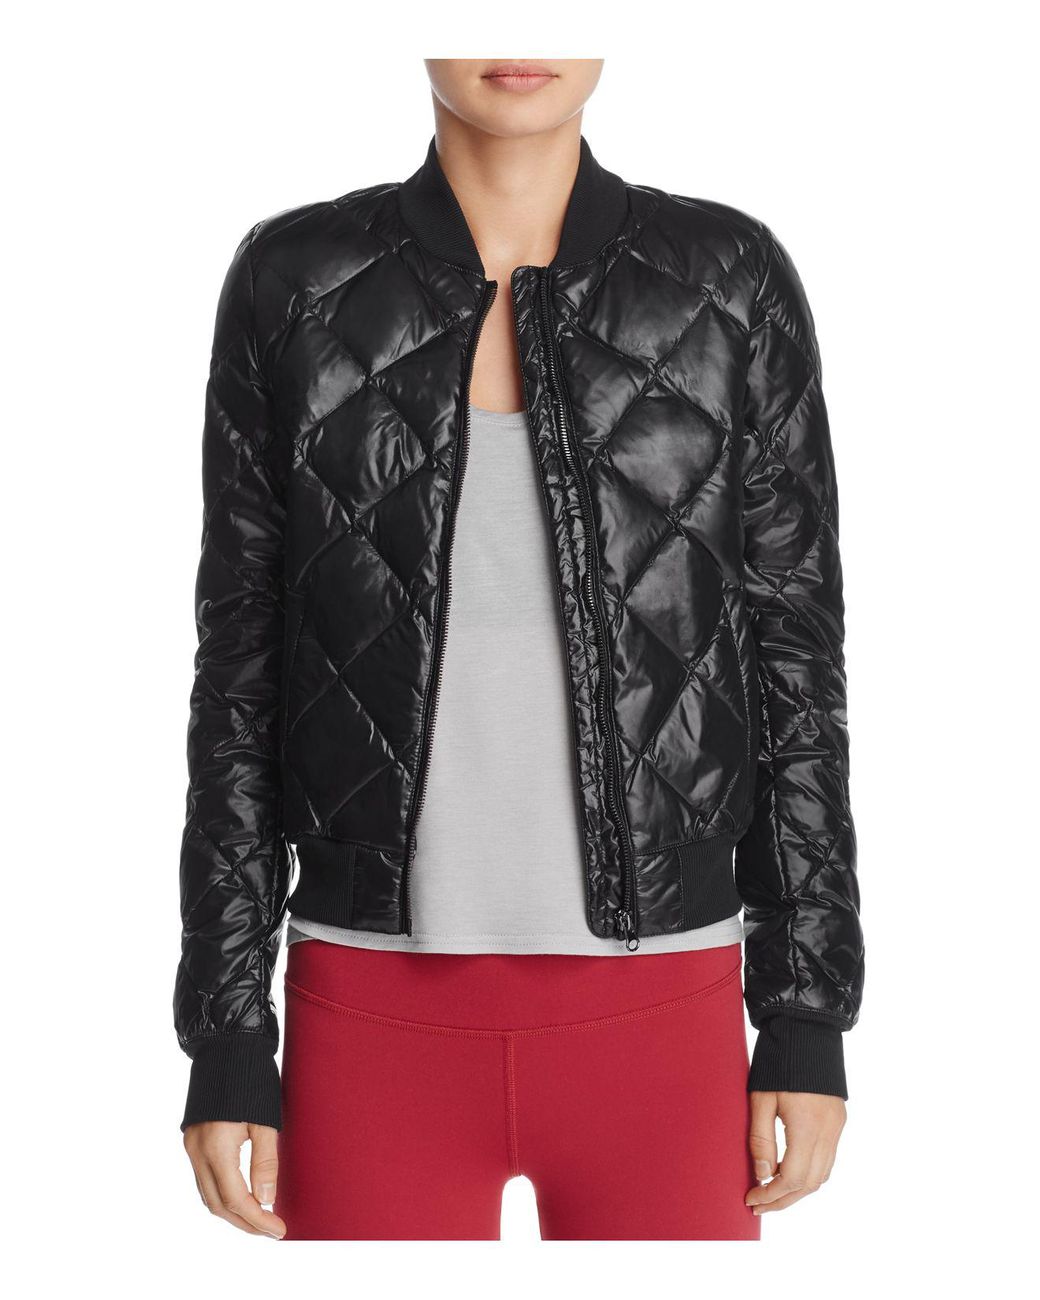 Alo Yoga Idol Quilted Bomber Jacket in Black | Lyst